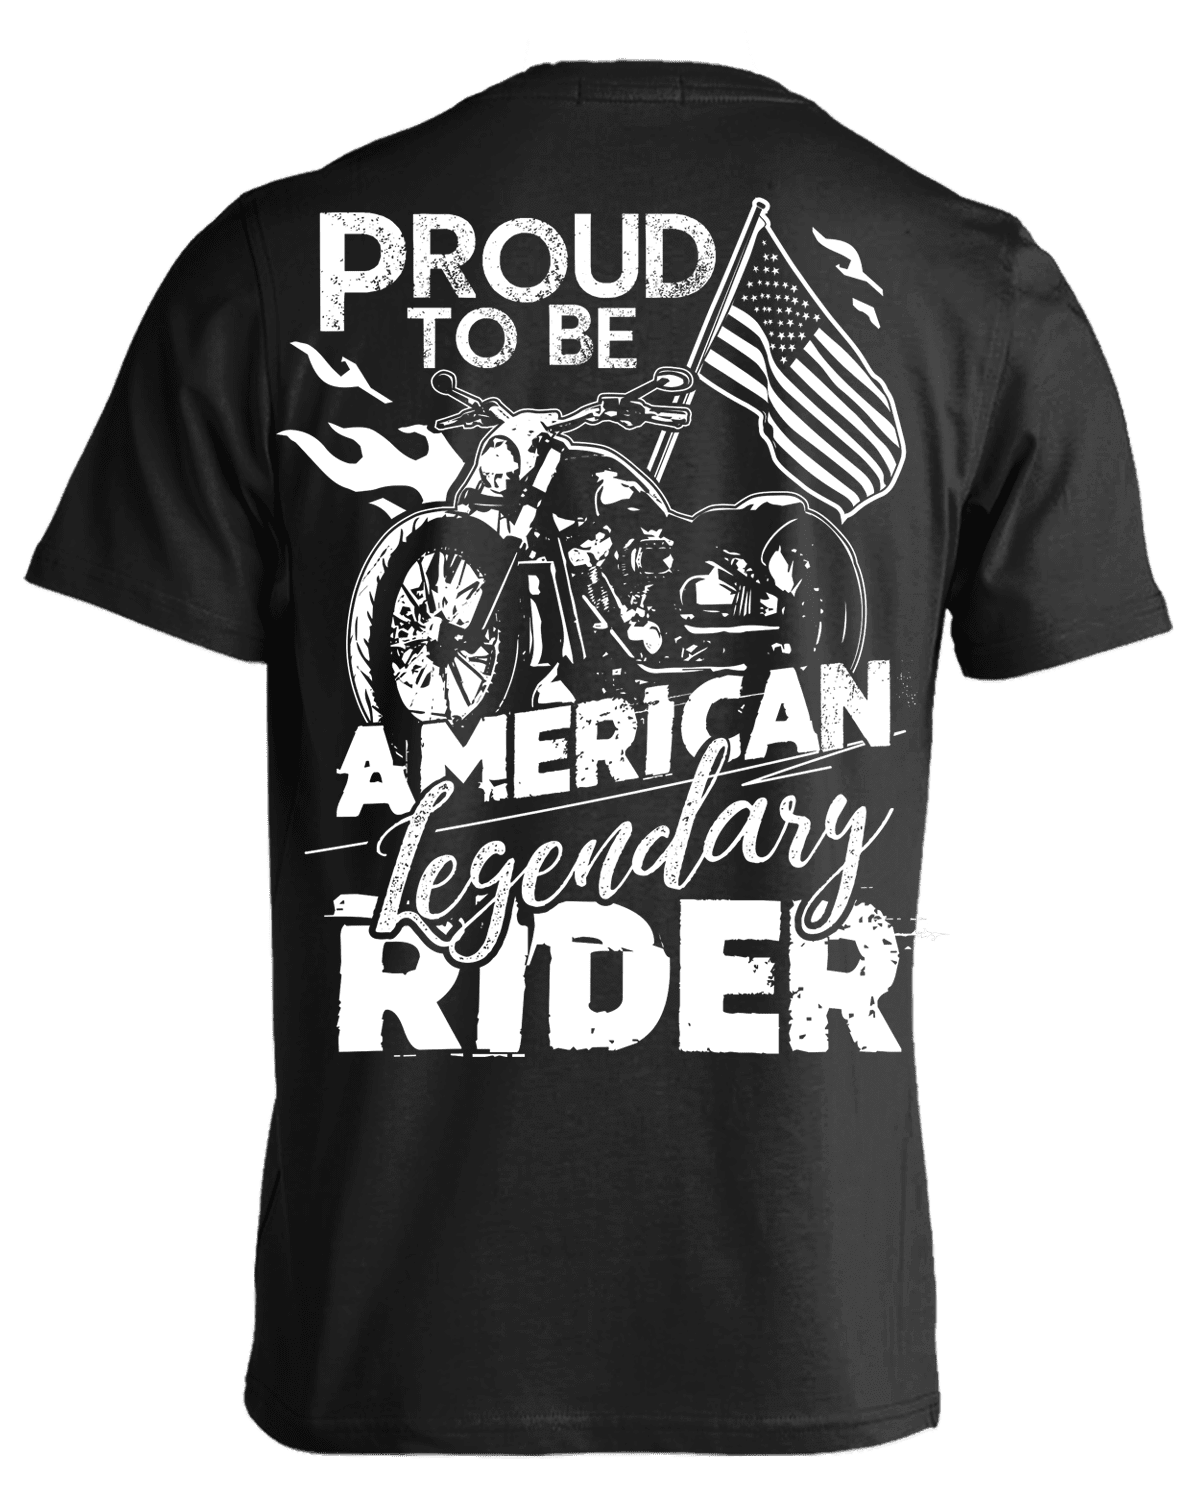 Proud to be American Legendary Rider T-Shirt - American Legend Rider